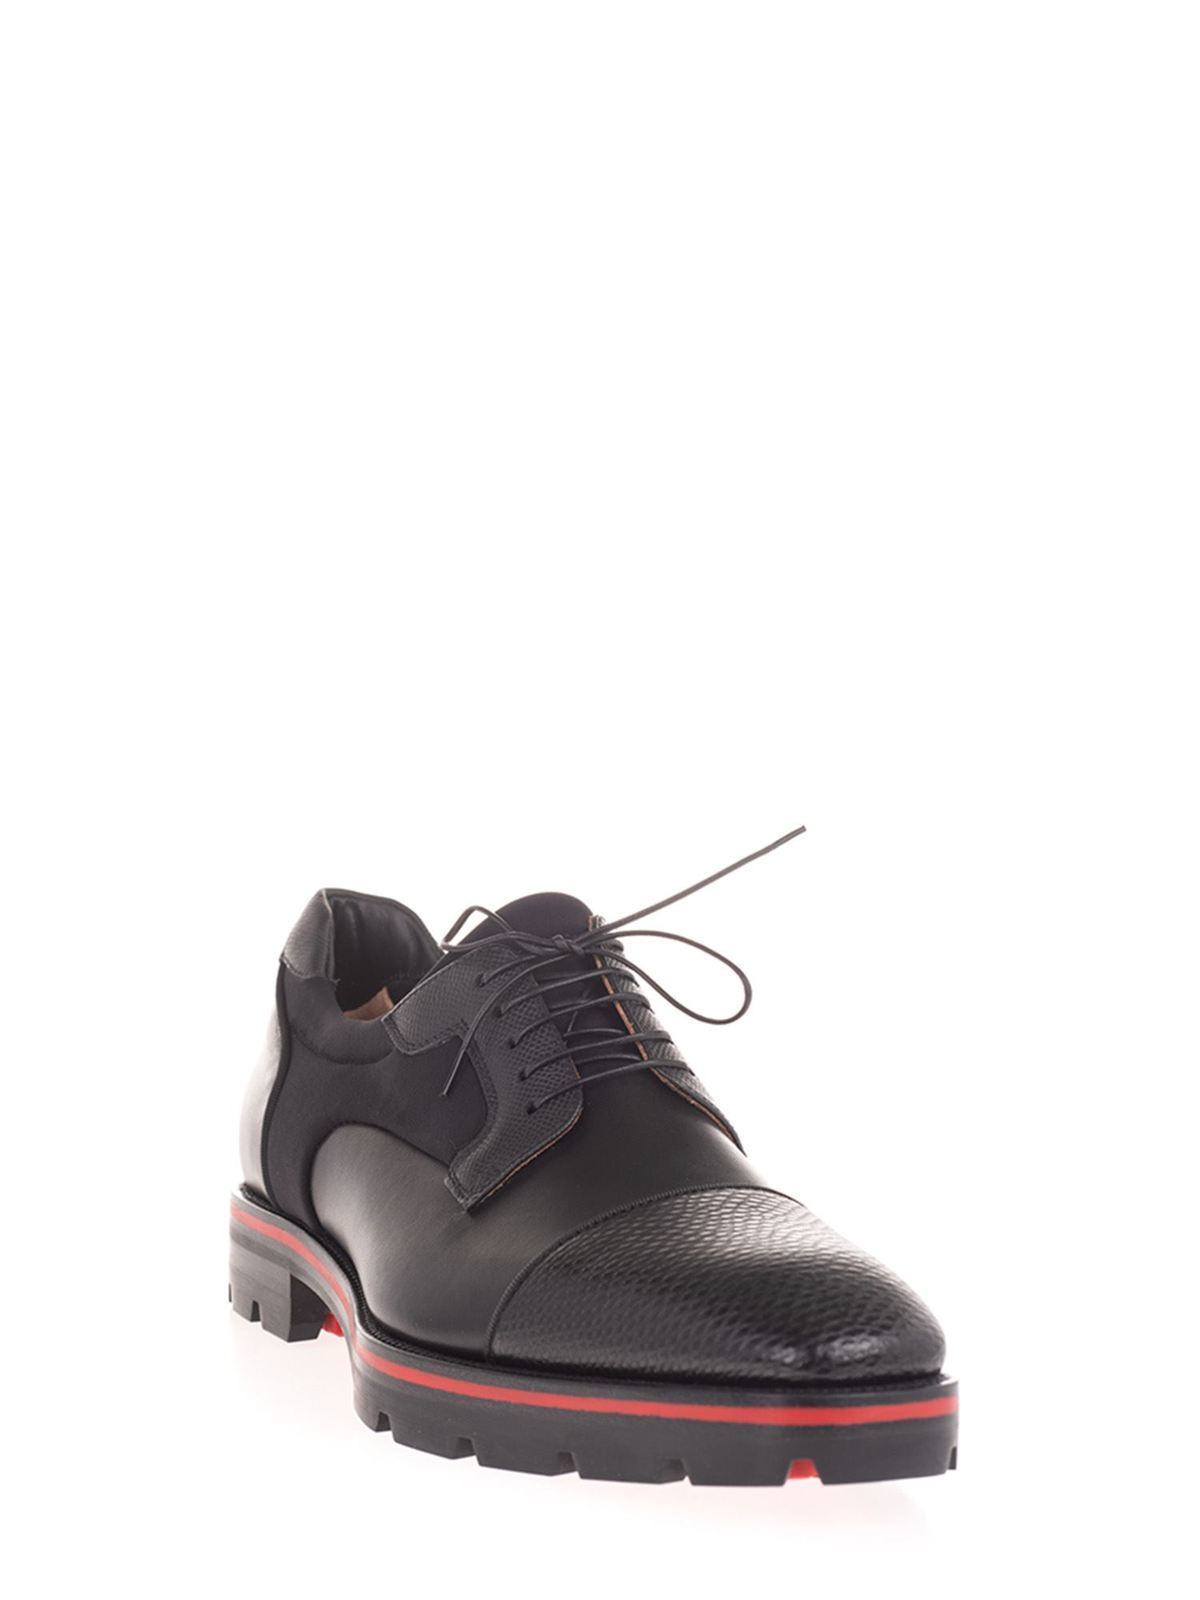 Christian Louboutin - Derby shoes in 